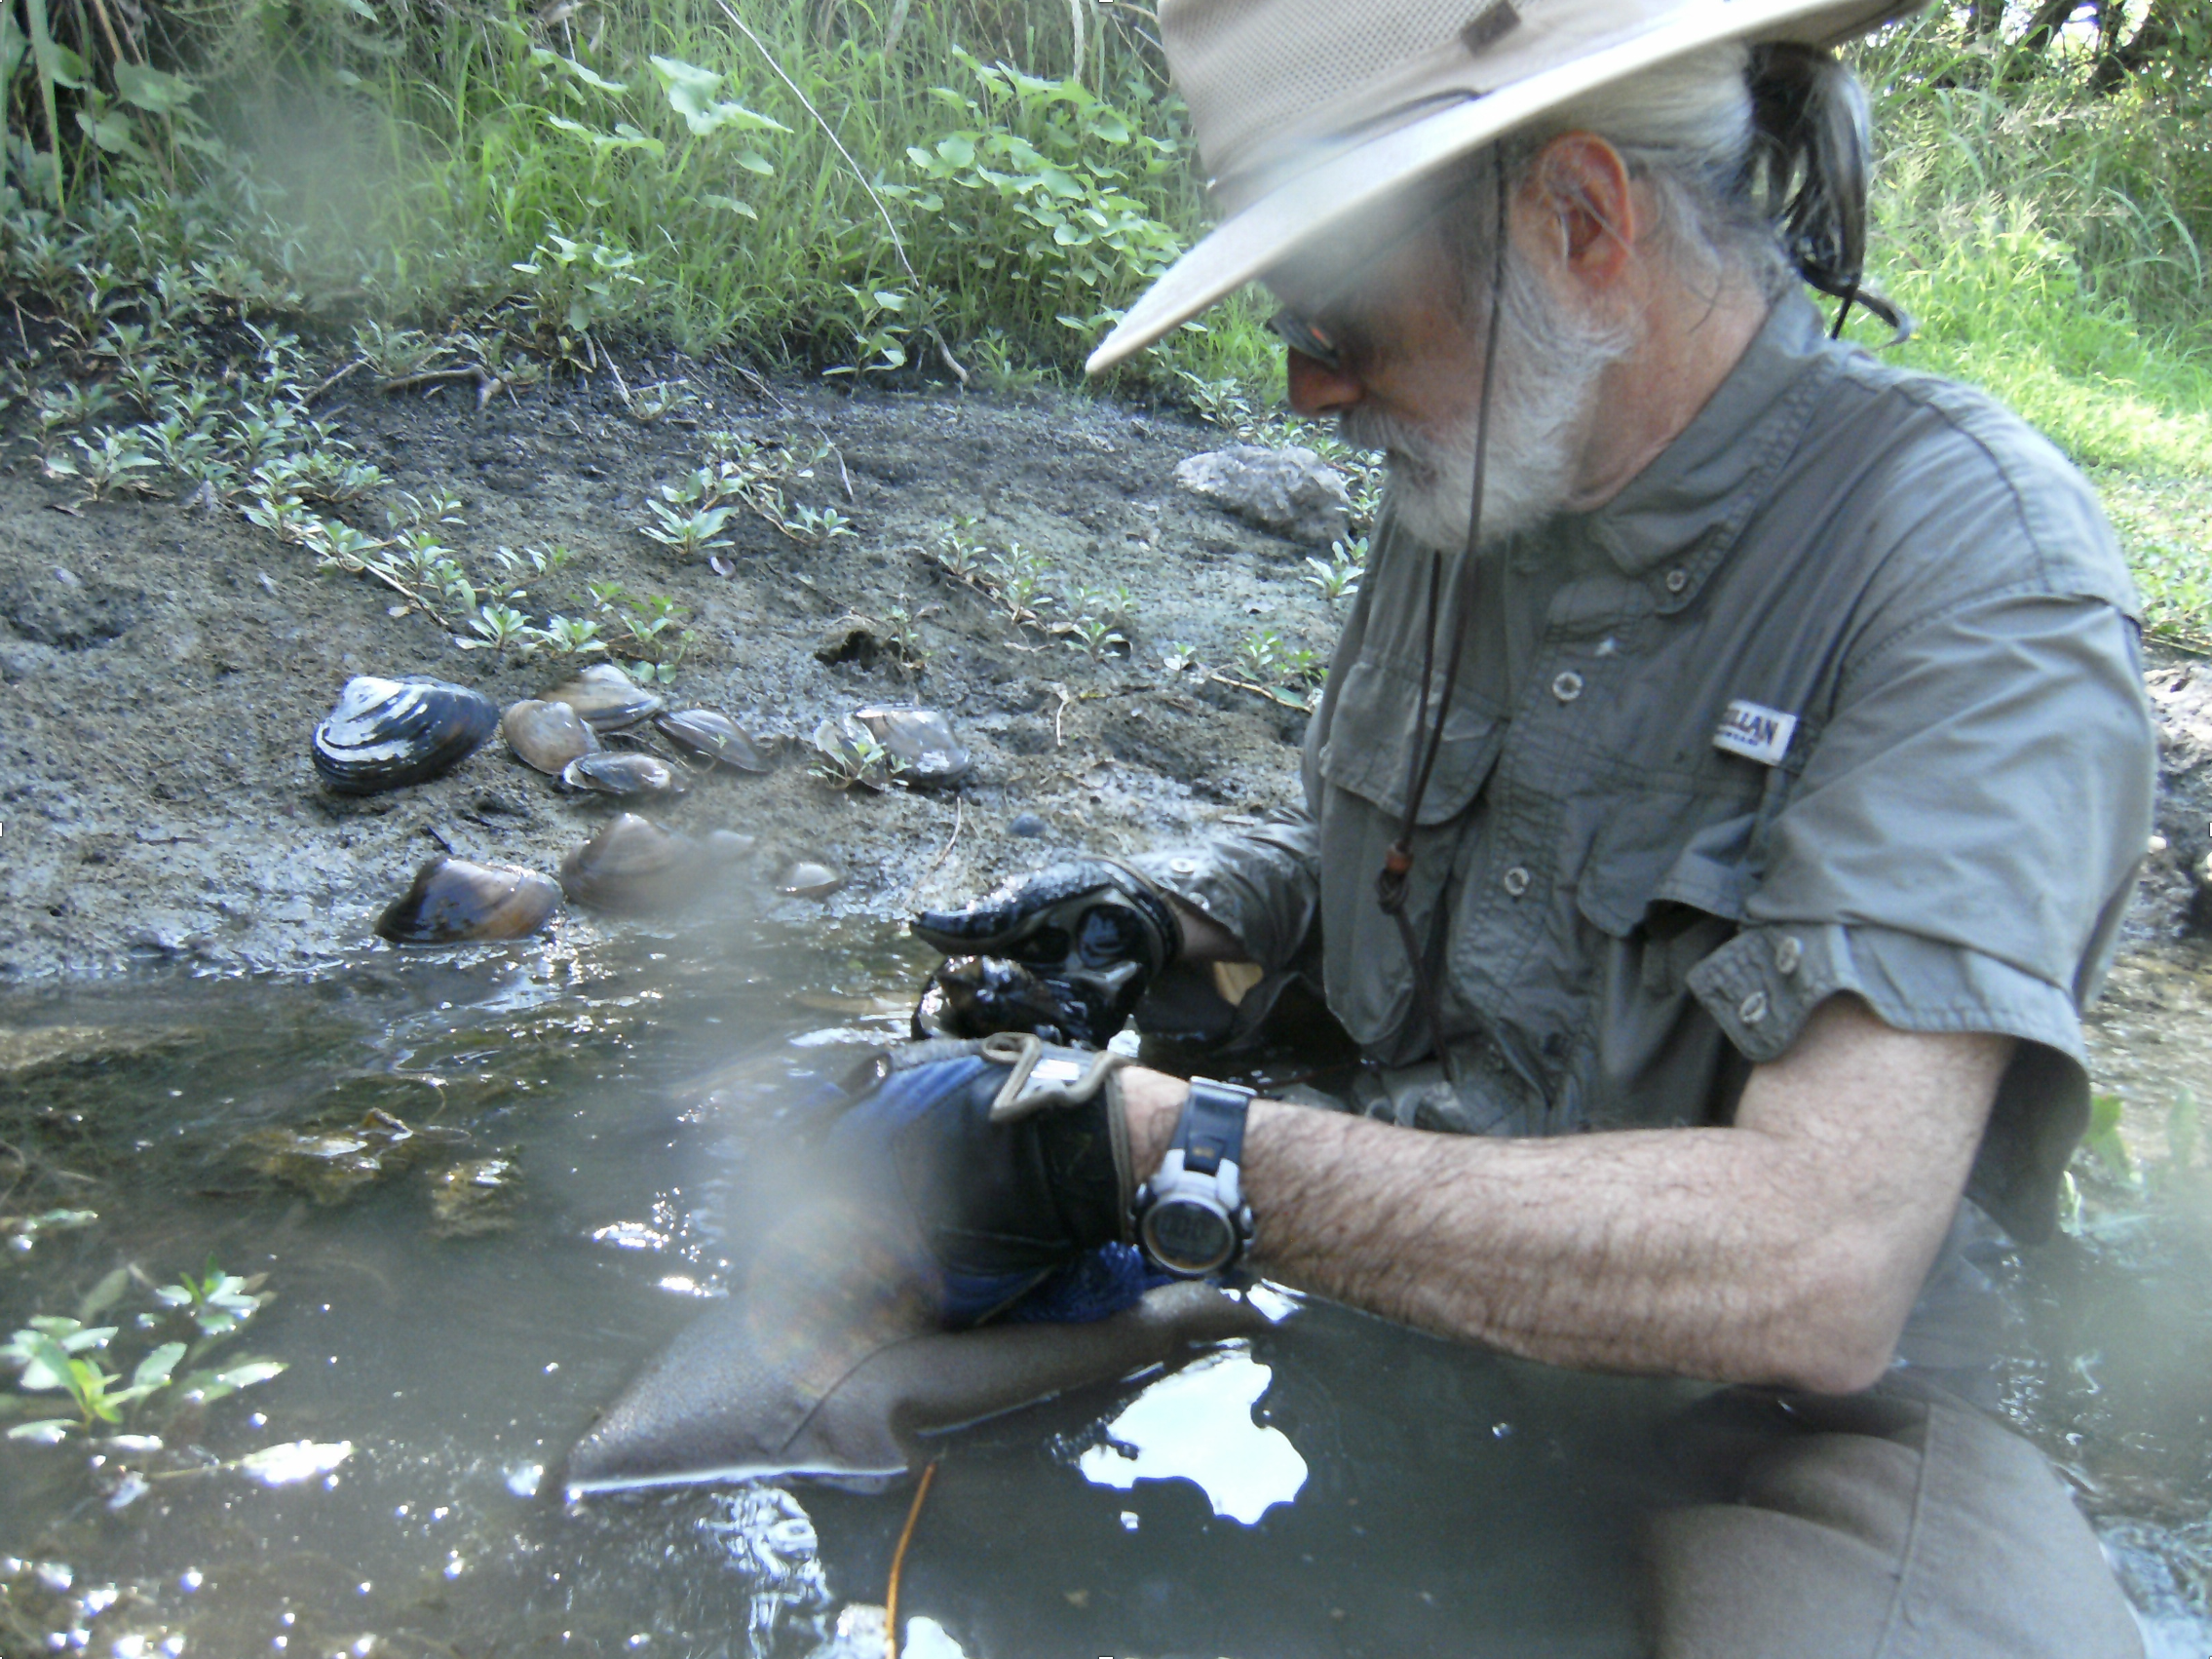 Dr. Ford out in the field in Sabine River conducting mussel research